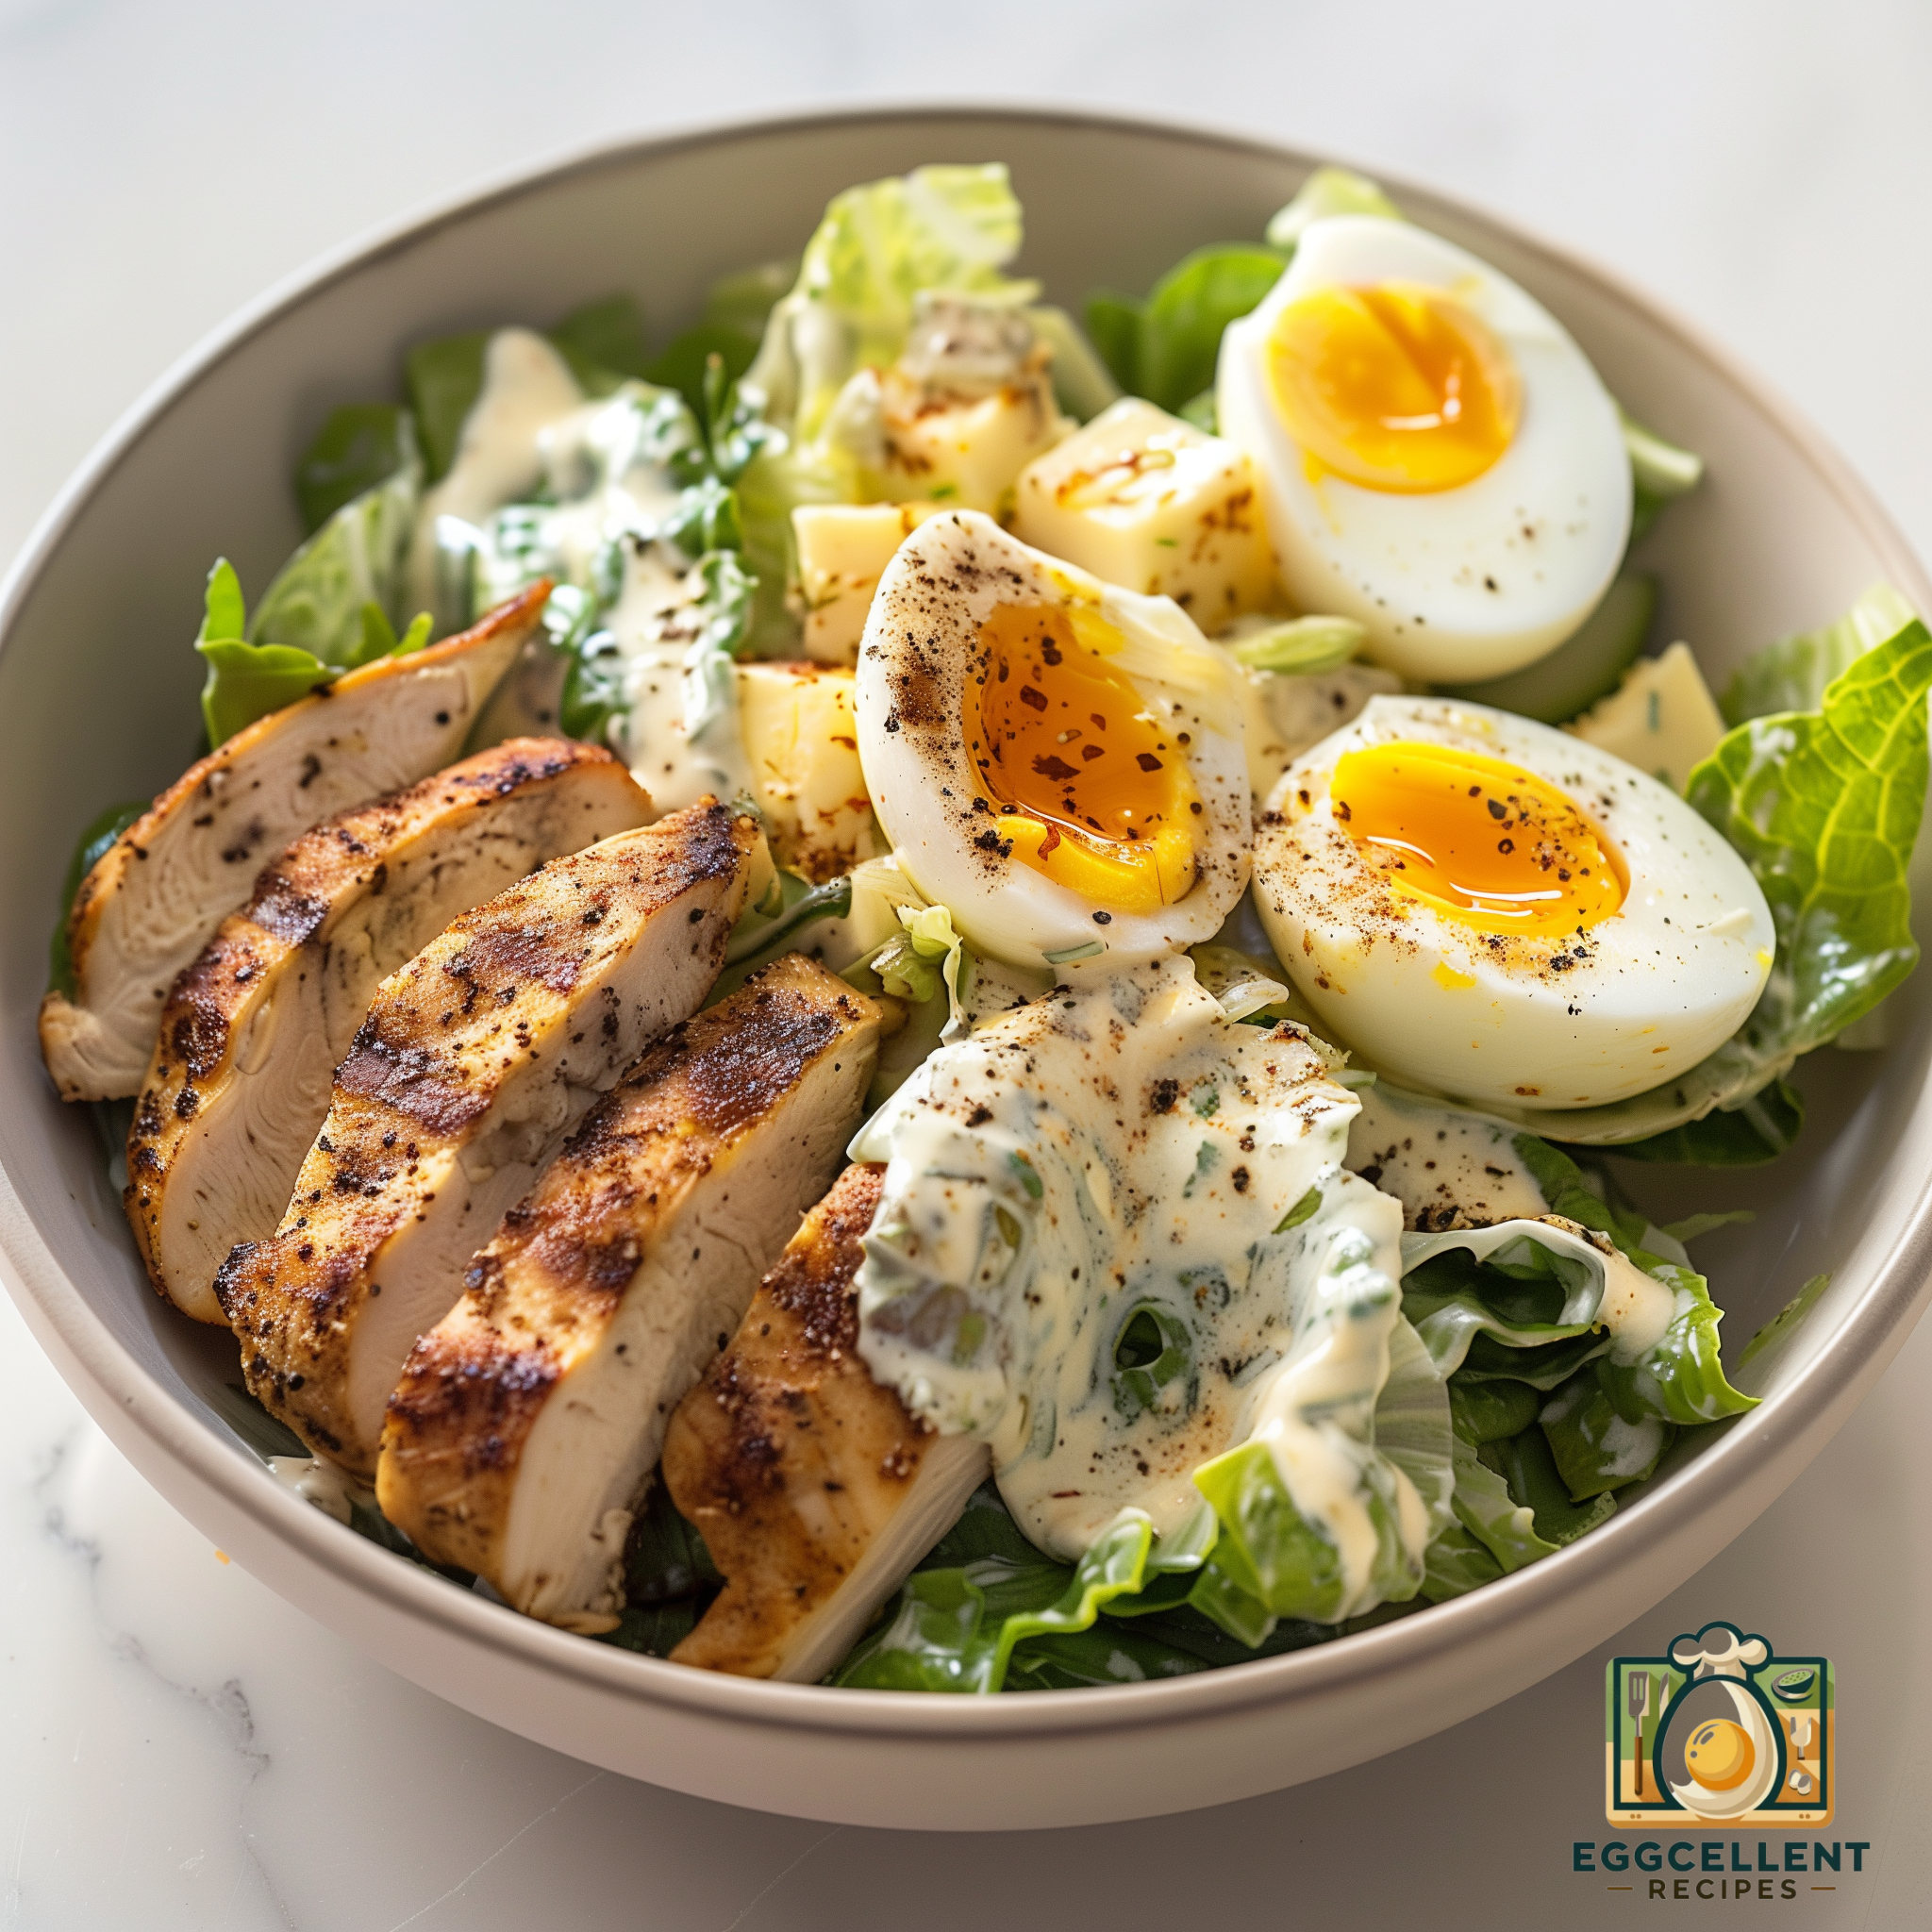 Caesar Salad with Grilled Chicken and Soft-Boiled Eggs Recipe